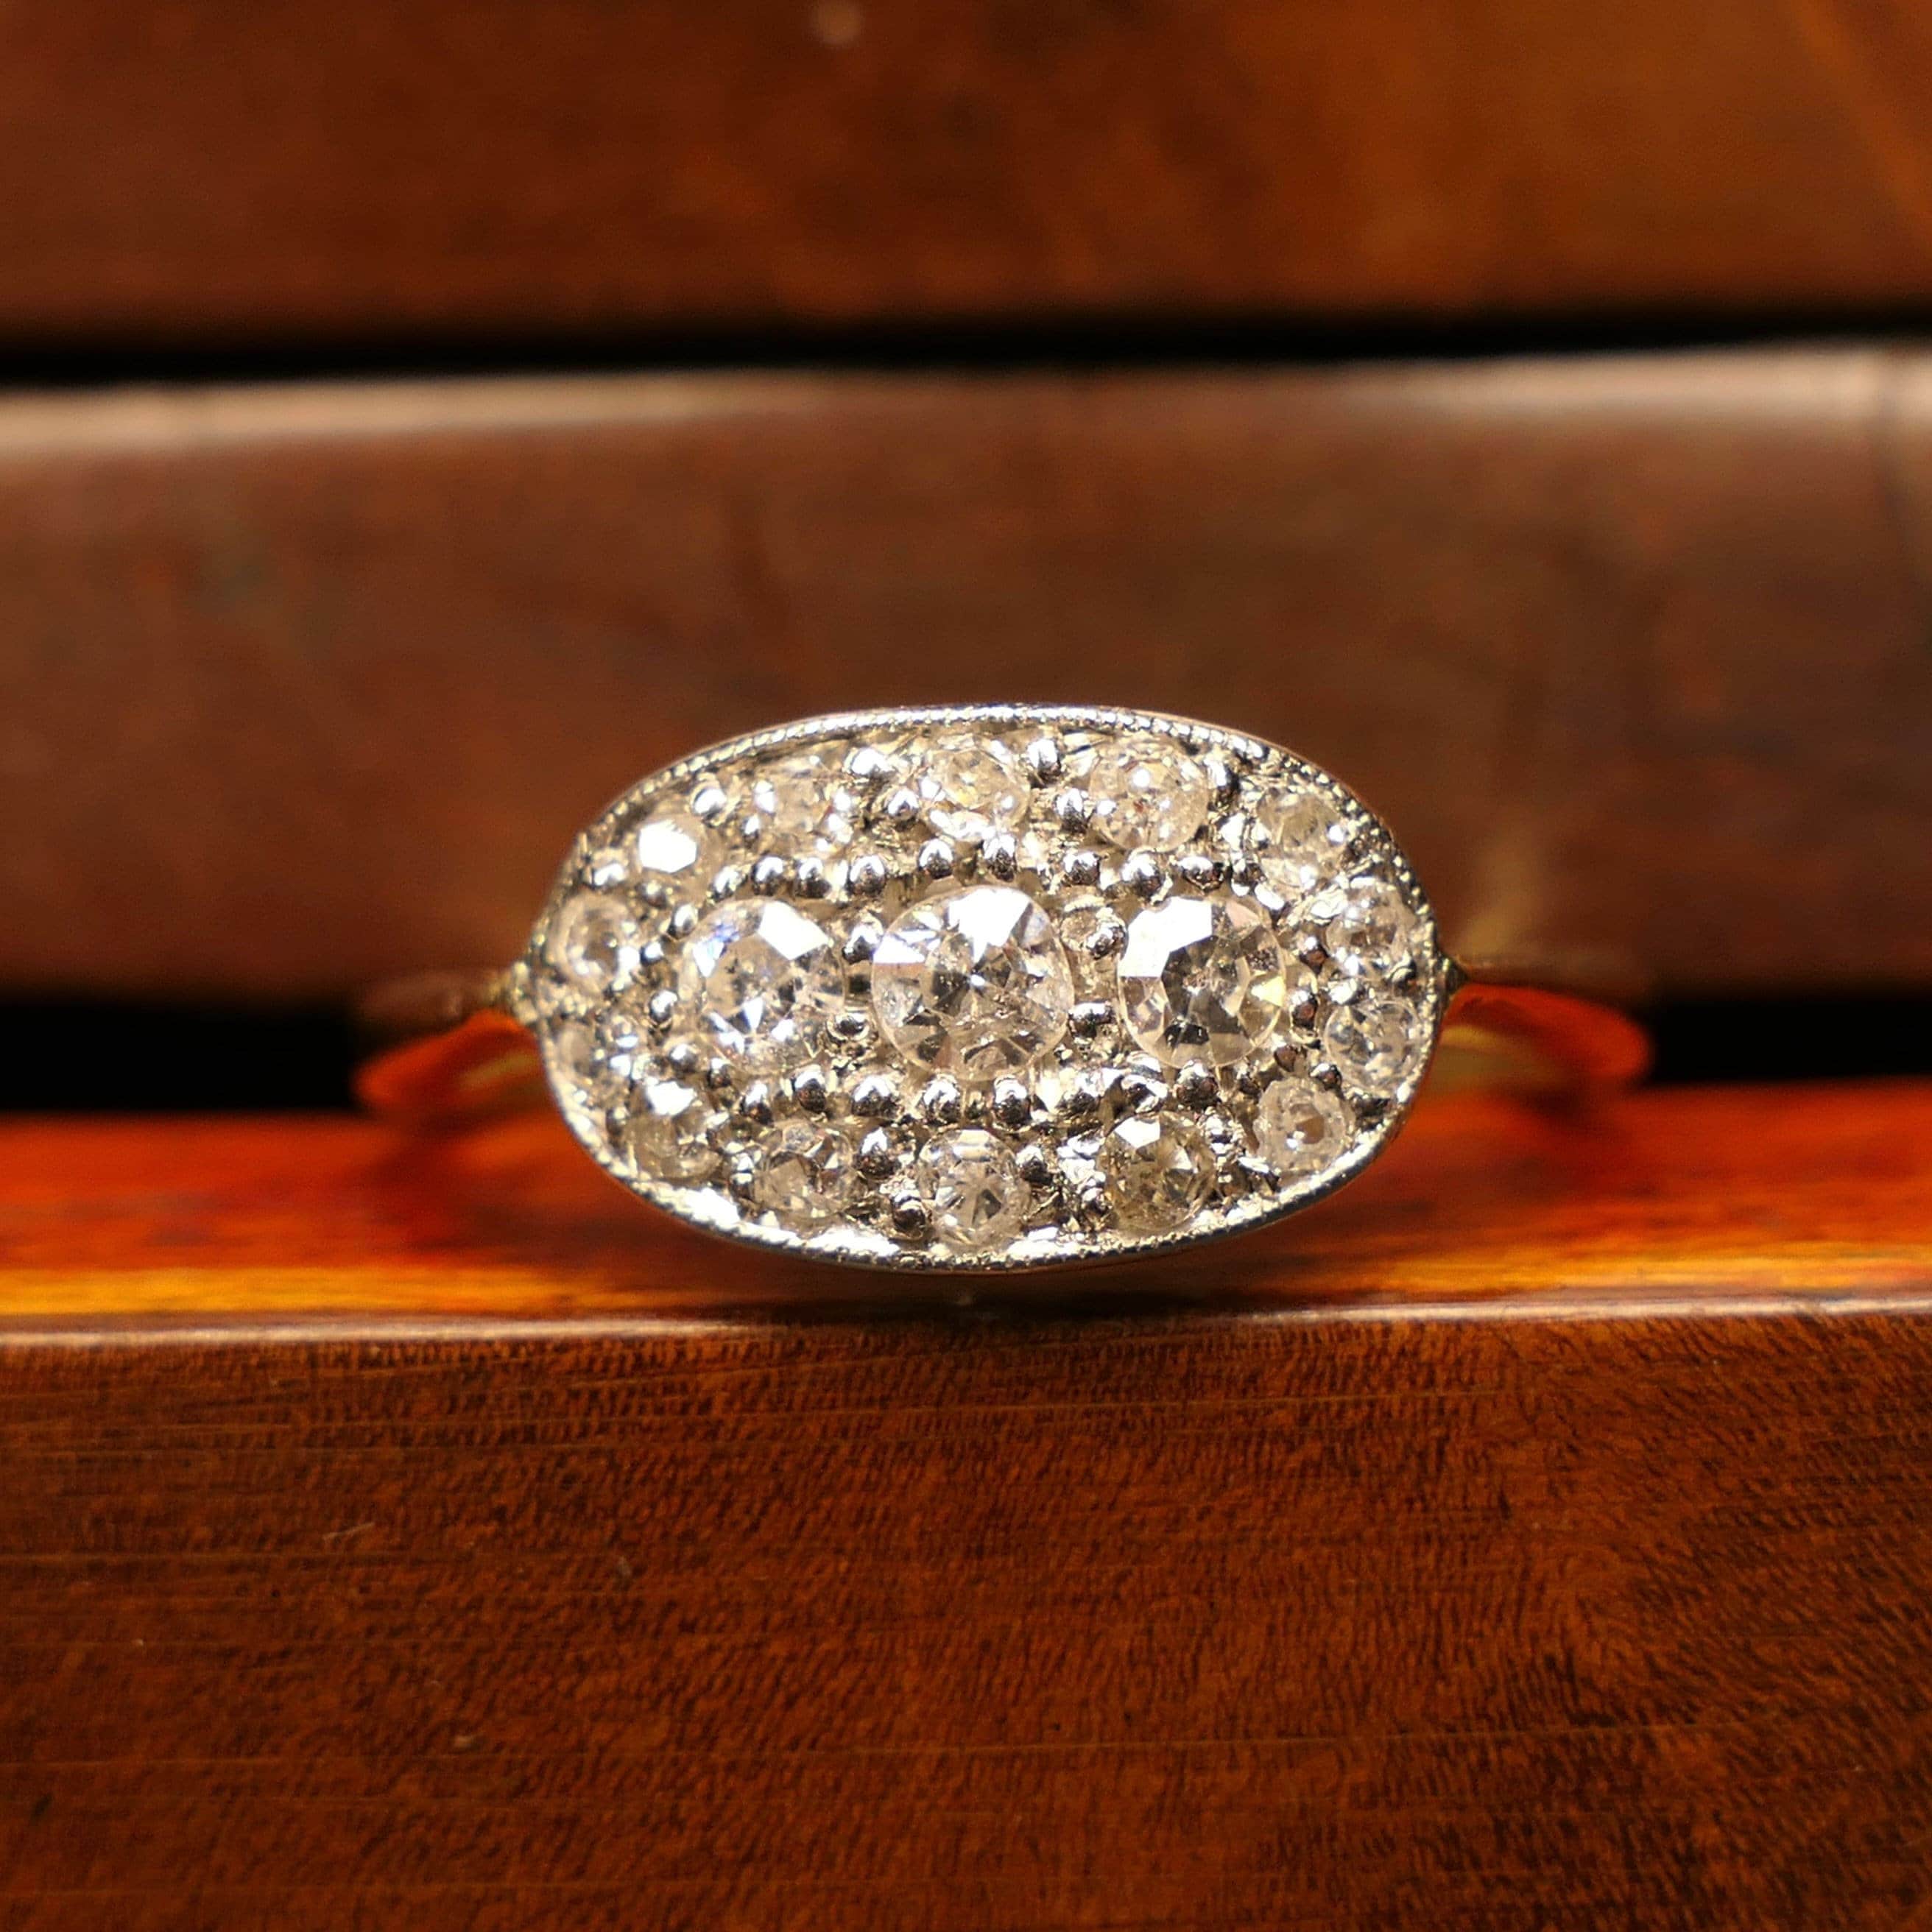 Early 20th century, 18ct gold & platinum, old cut diamond cluster ring, c1910